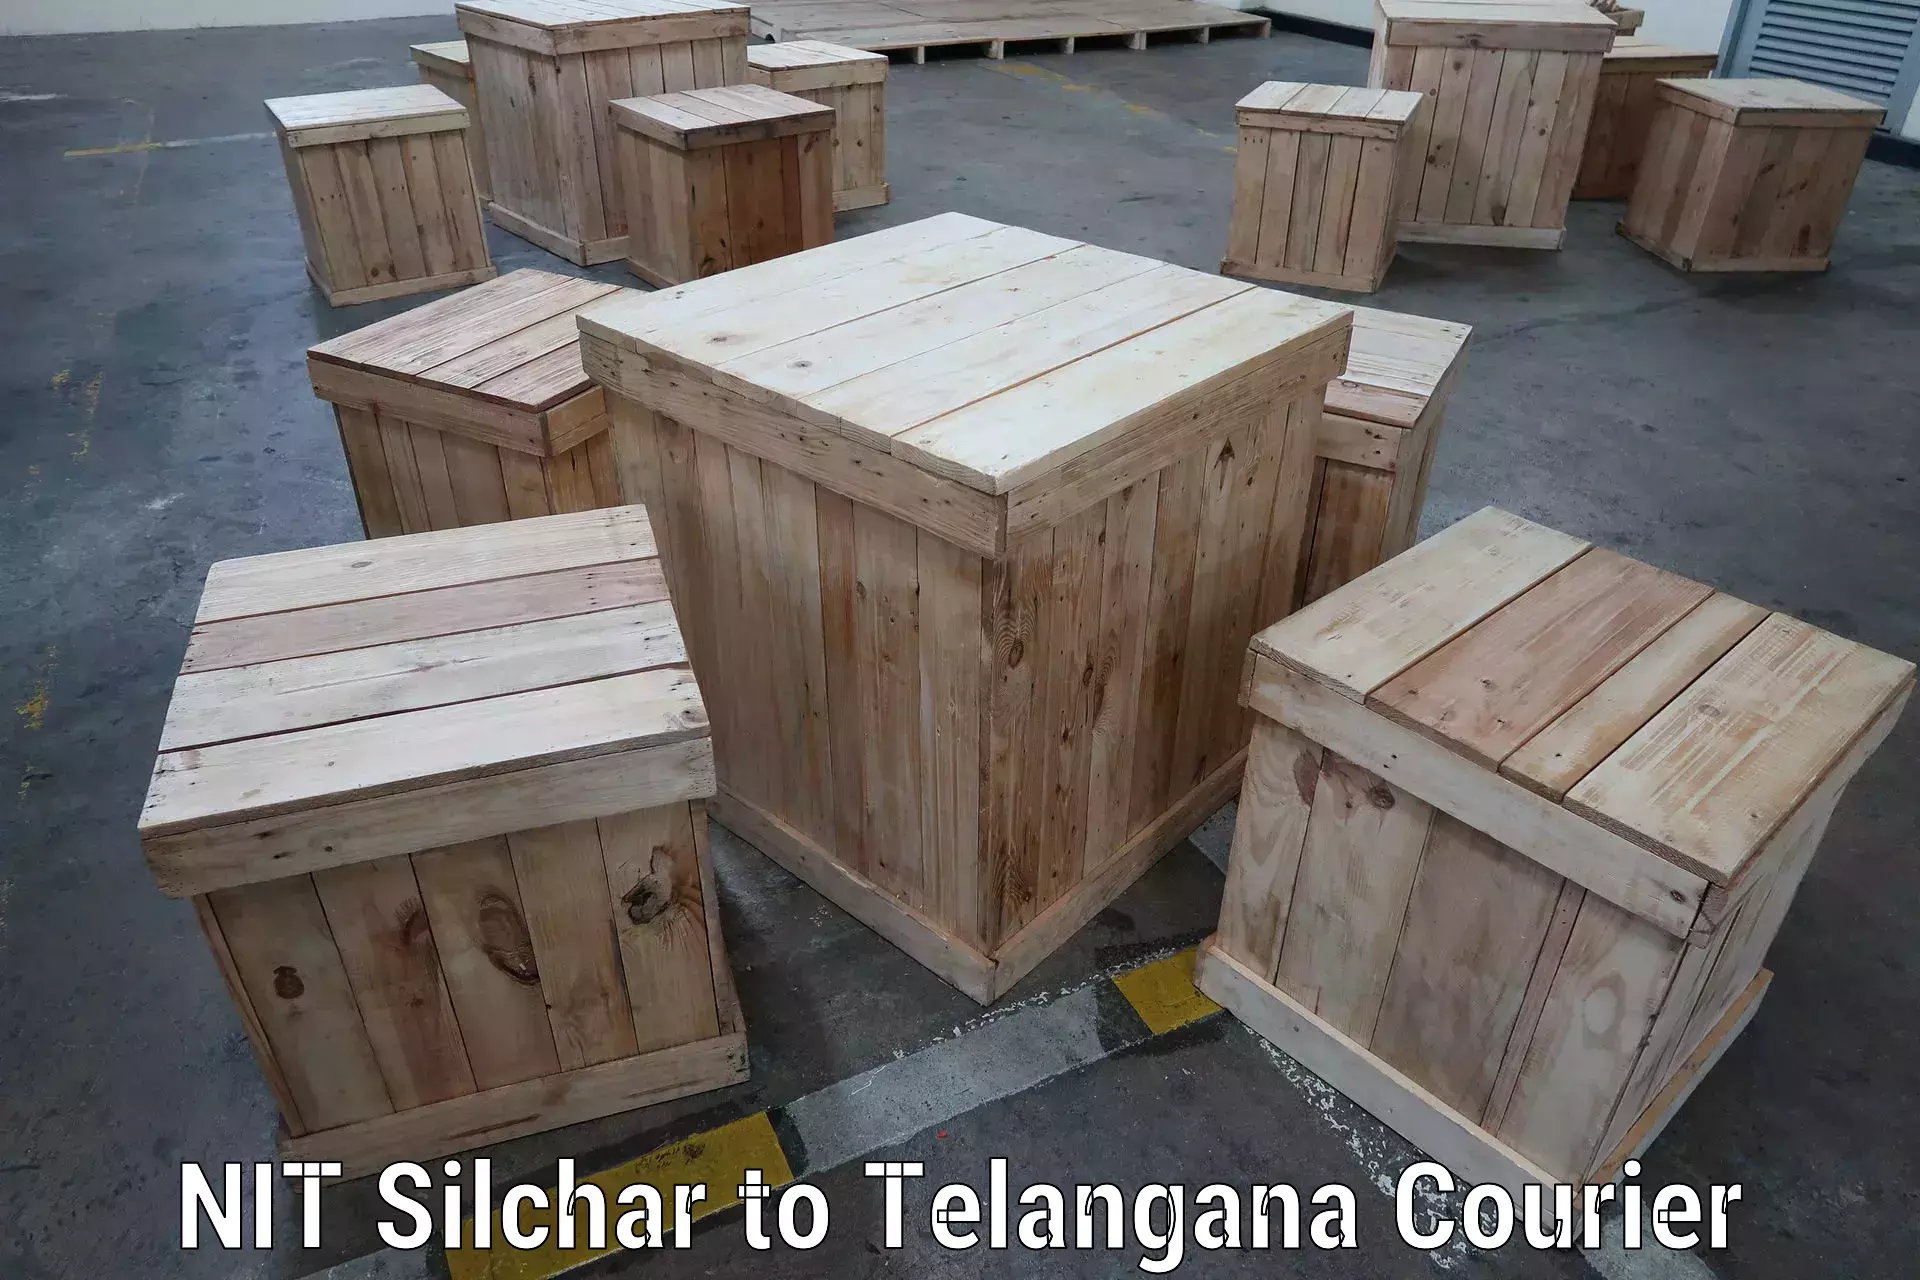 Sustainable courier practices NIT Silchar to Manneguda